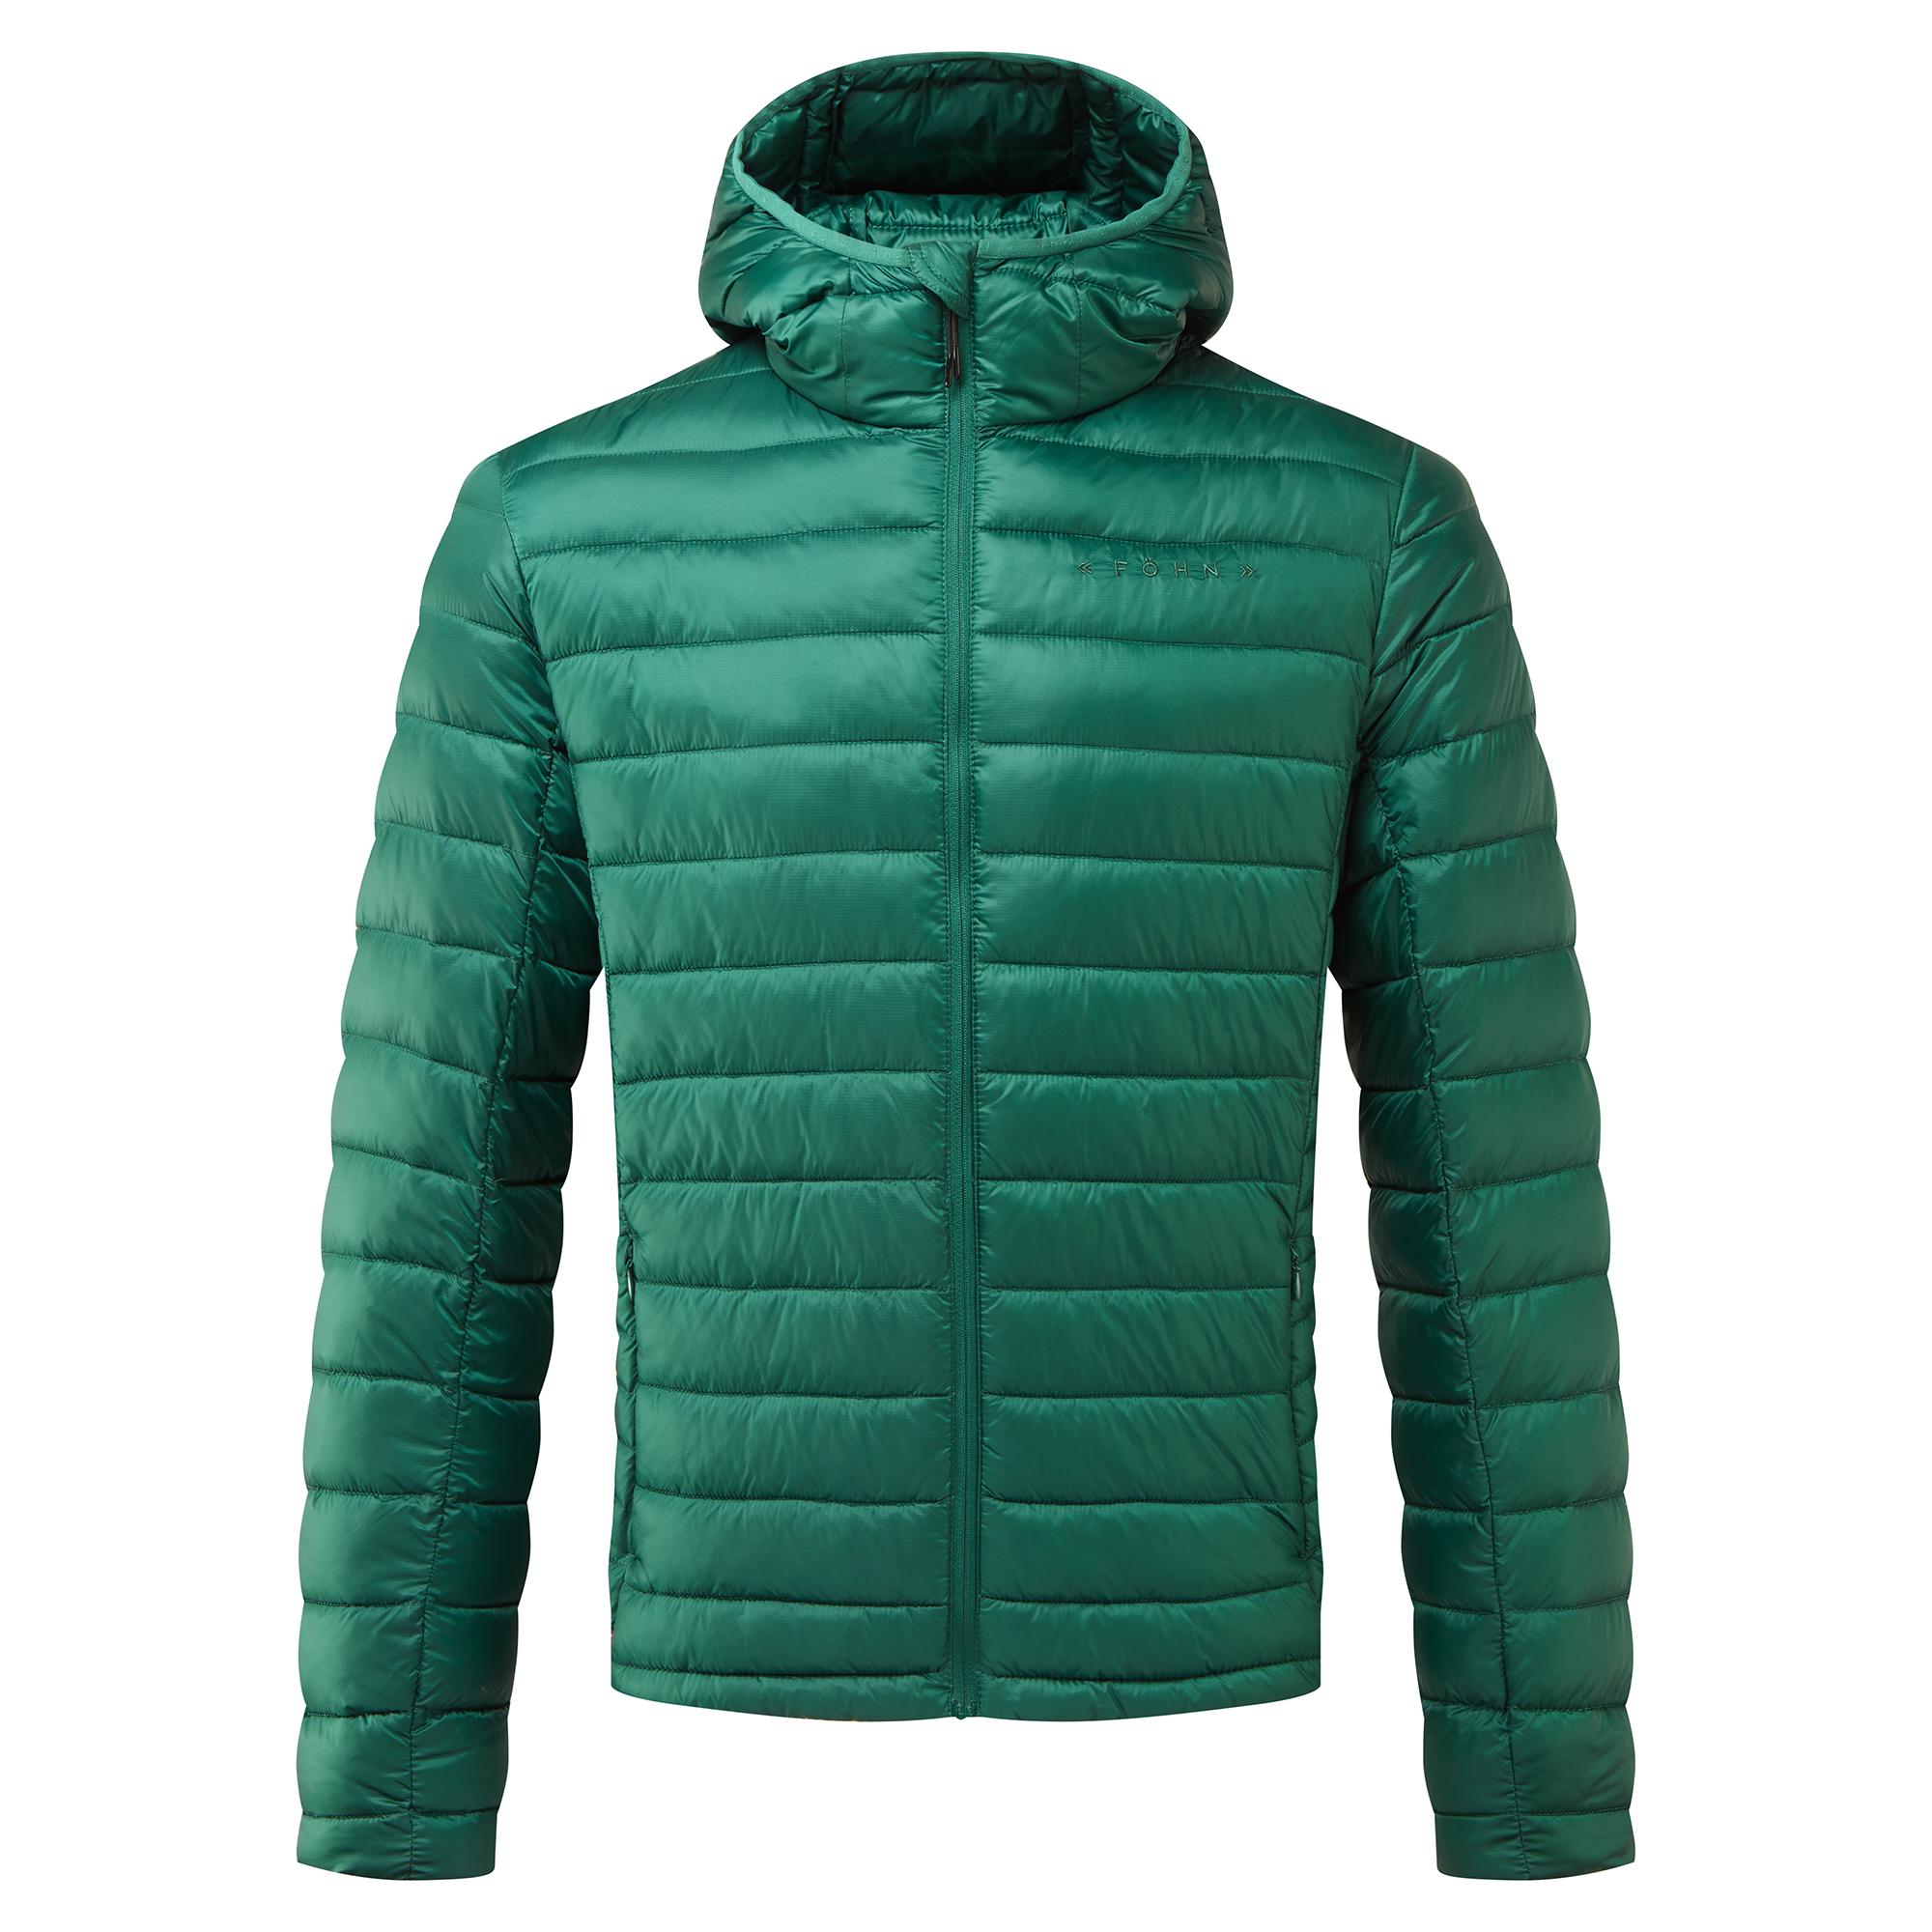 Fhn Mens Micro Synthetic Down Hooded Jacket - Forest Biome